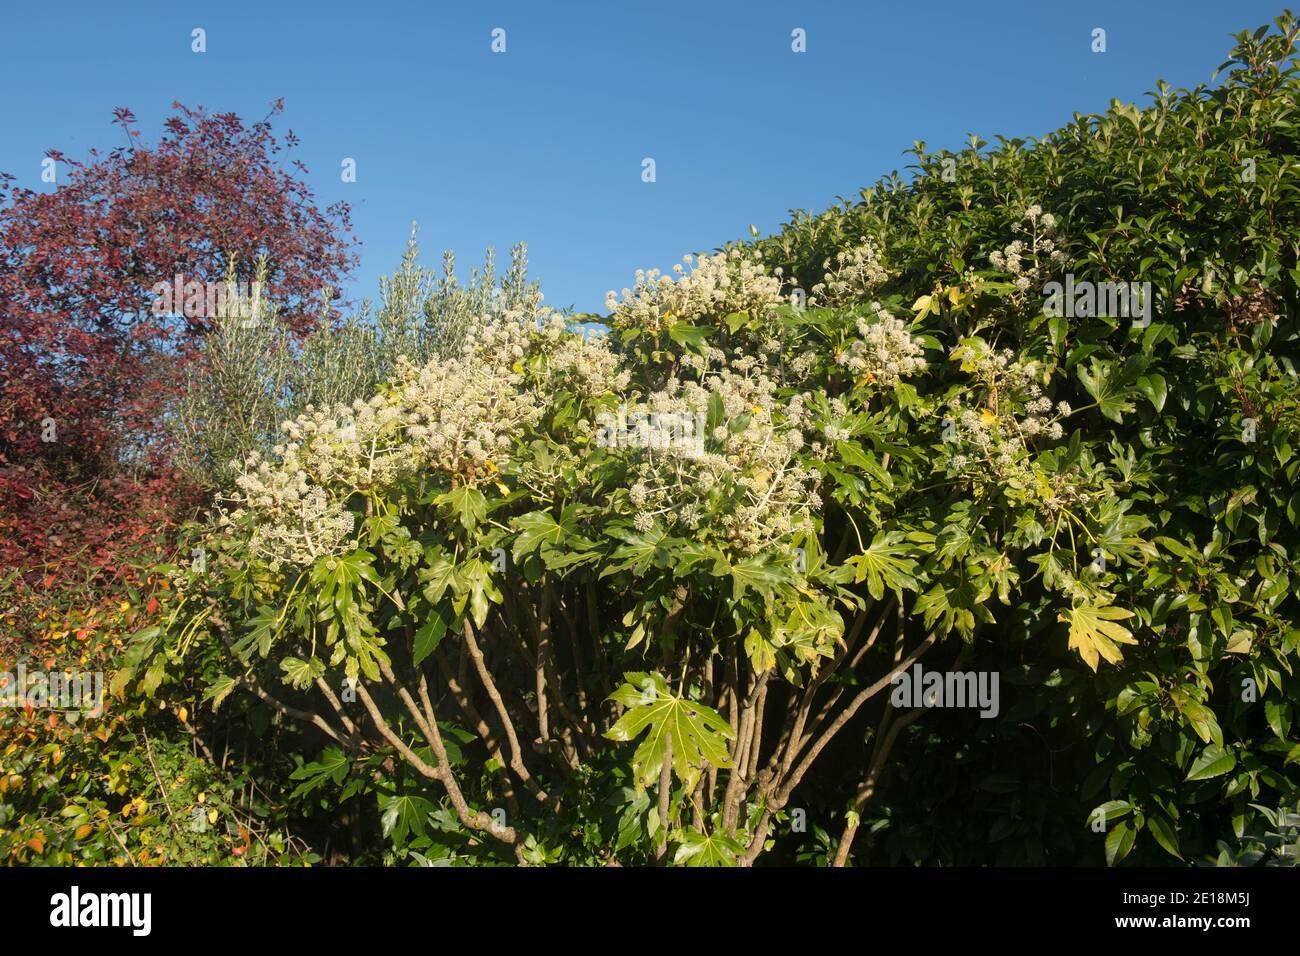 Autumn White Flowers and Leaves of a Japanese Aralia or Castor Oil Plant (Fatsia japonica) with a Bright Blue Sky background Growing in a Garden Stock Photo